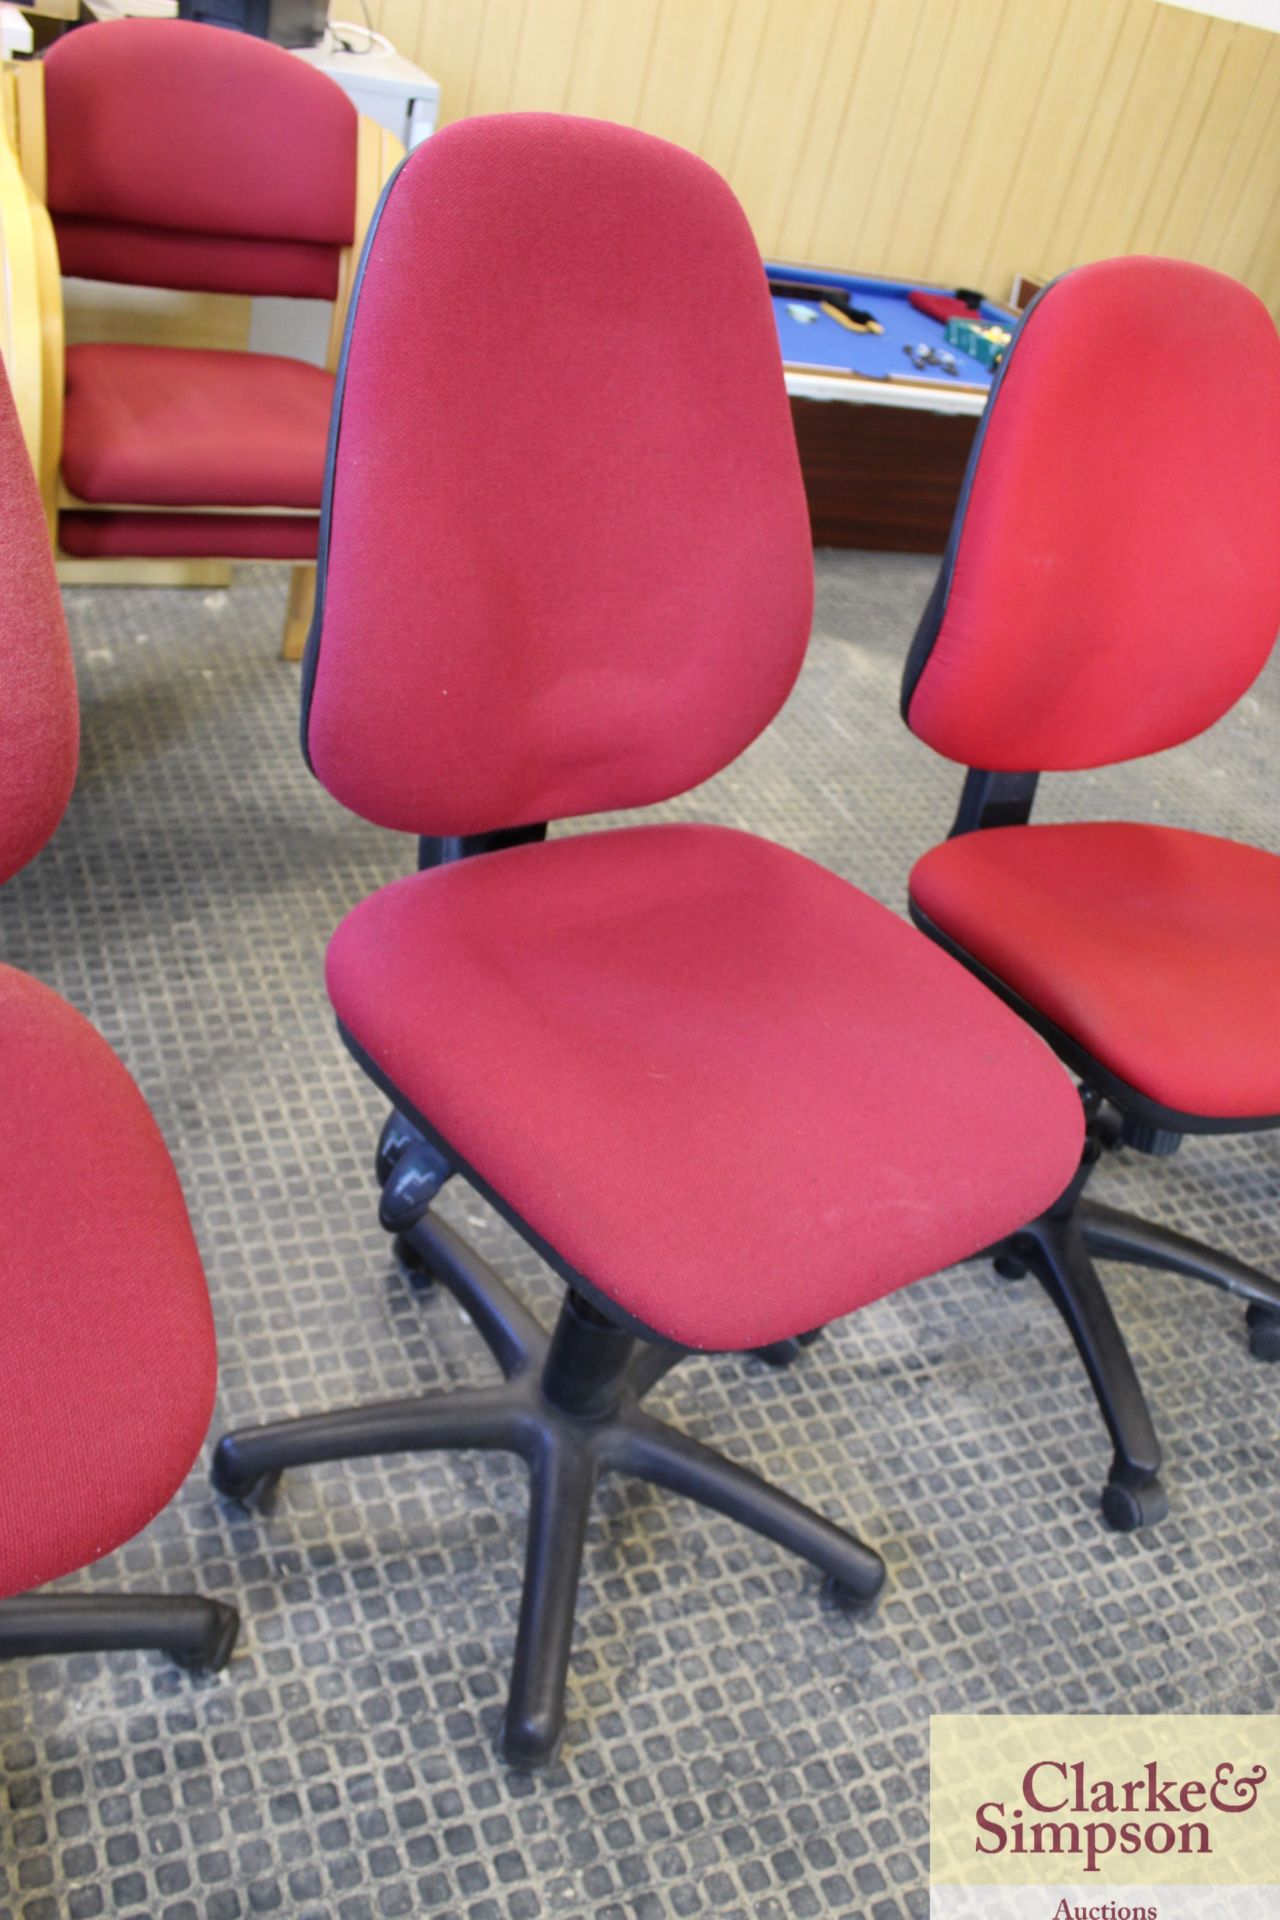 5x office chairs. - Image 3 of 6